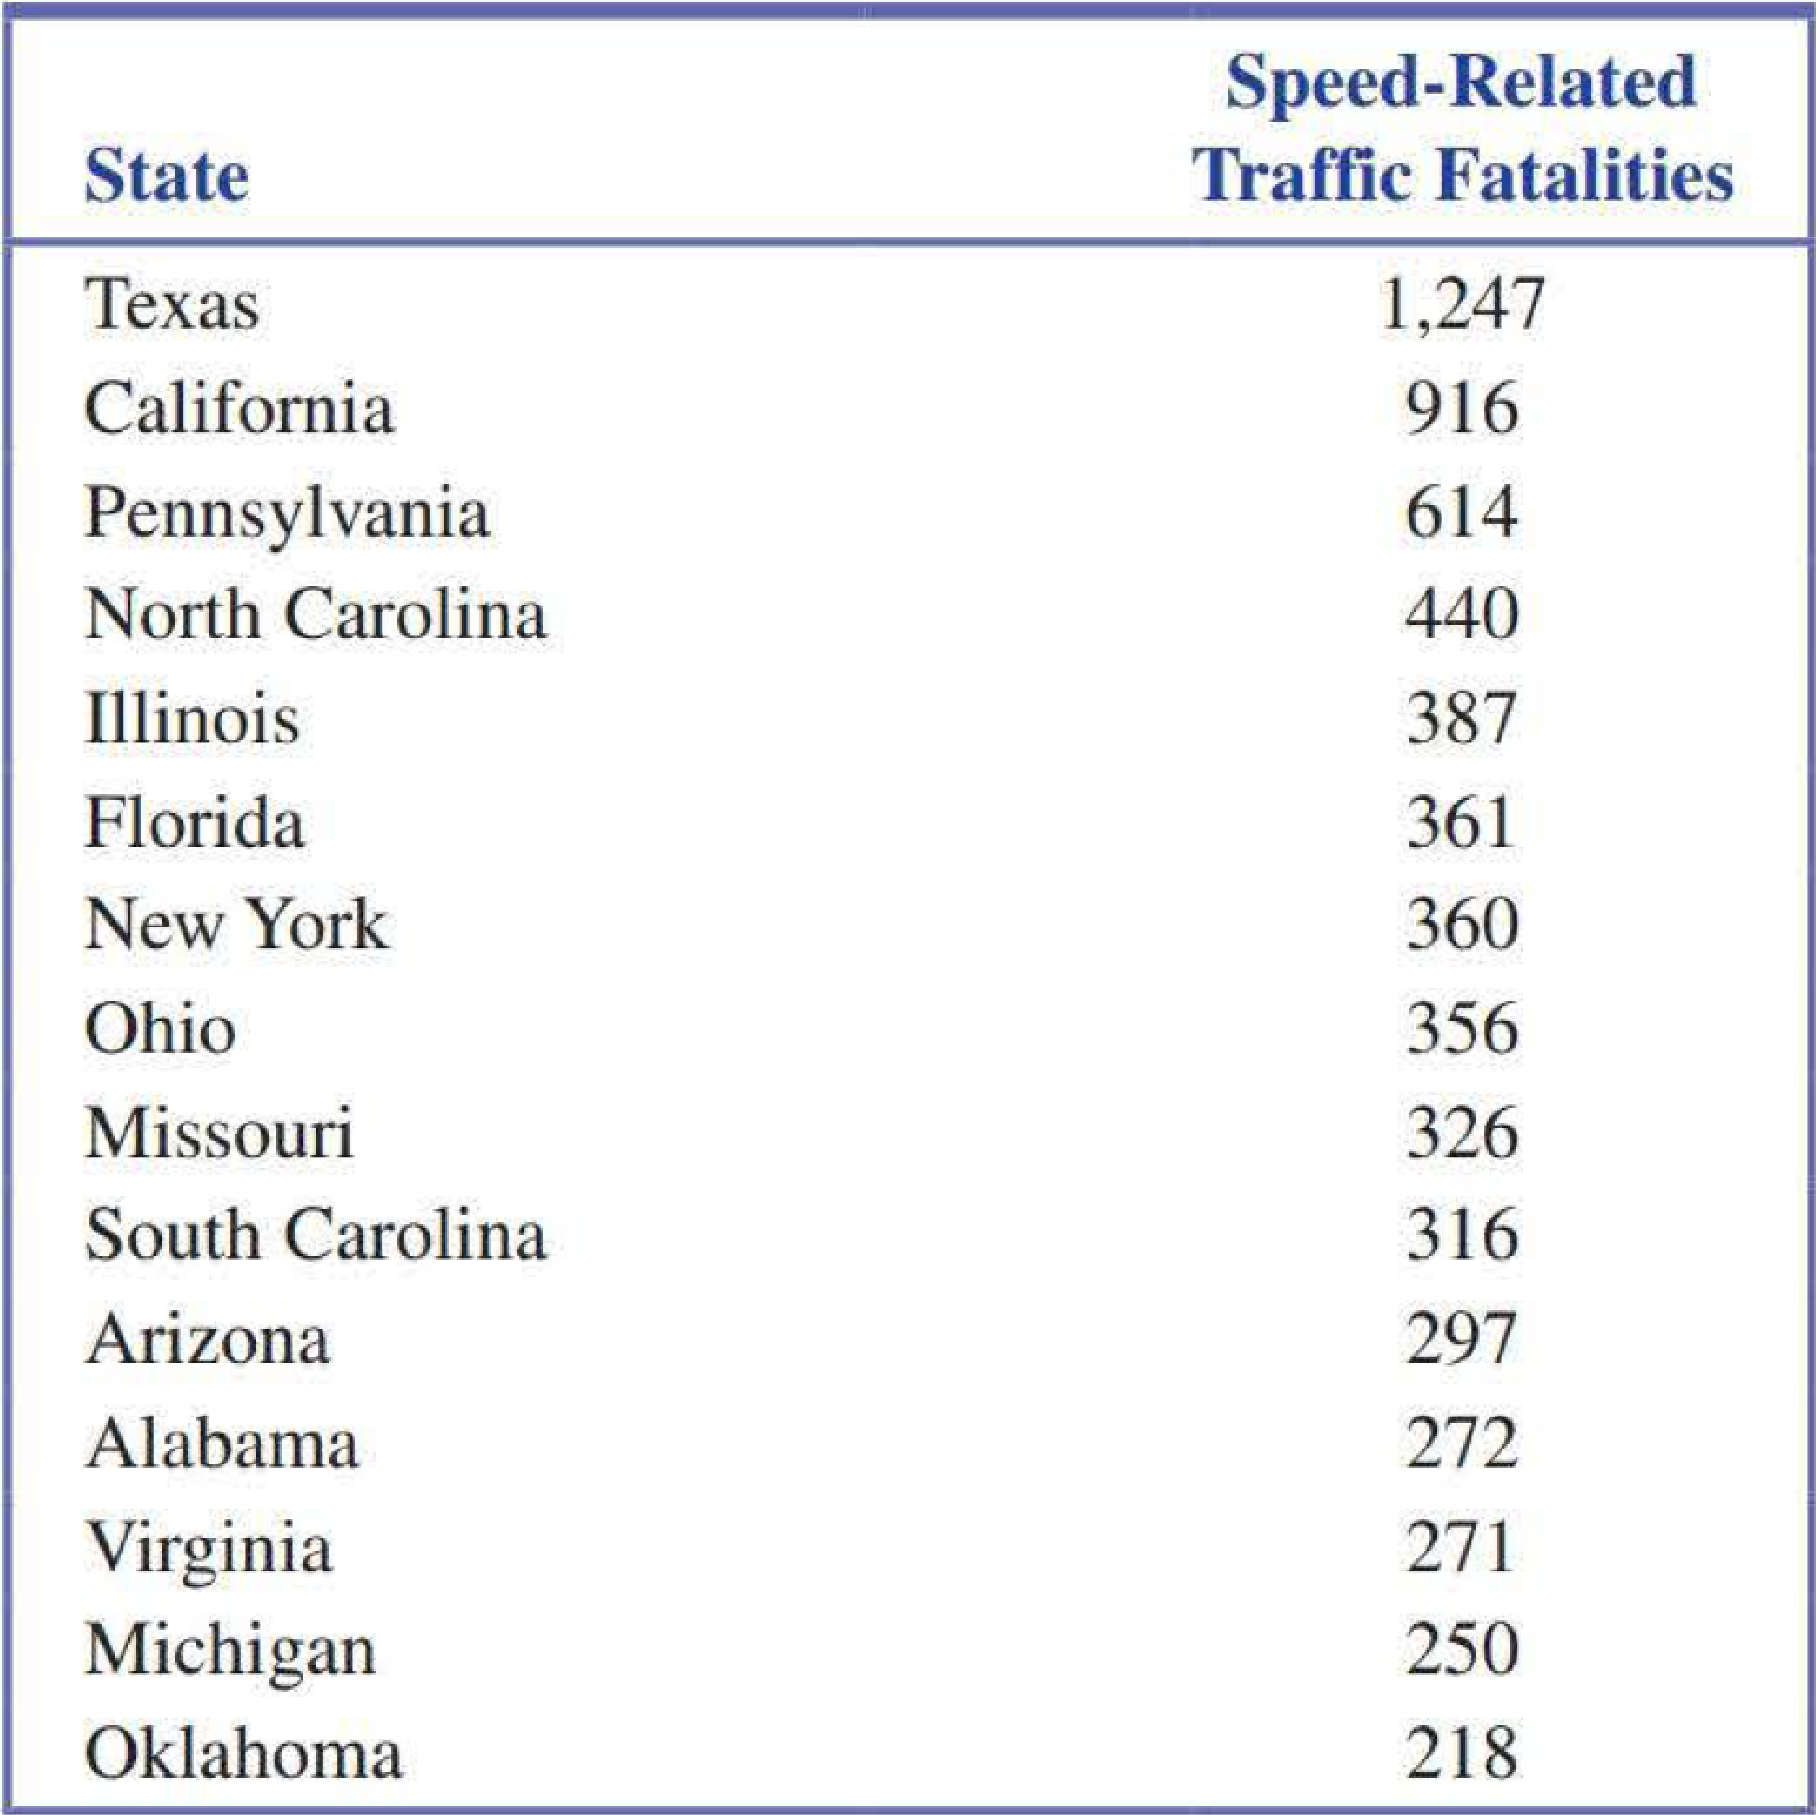 Chapter 4.1, Problem 9E, The U.S. Department of Transportation reported the number of speed-related crash fatalities for the 